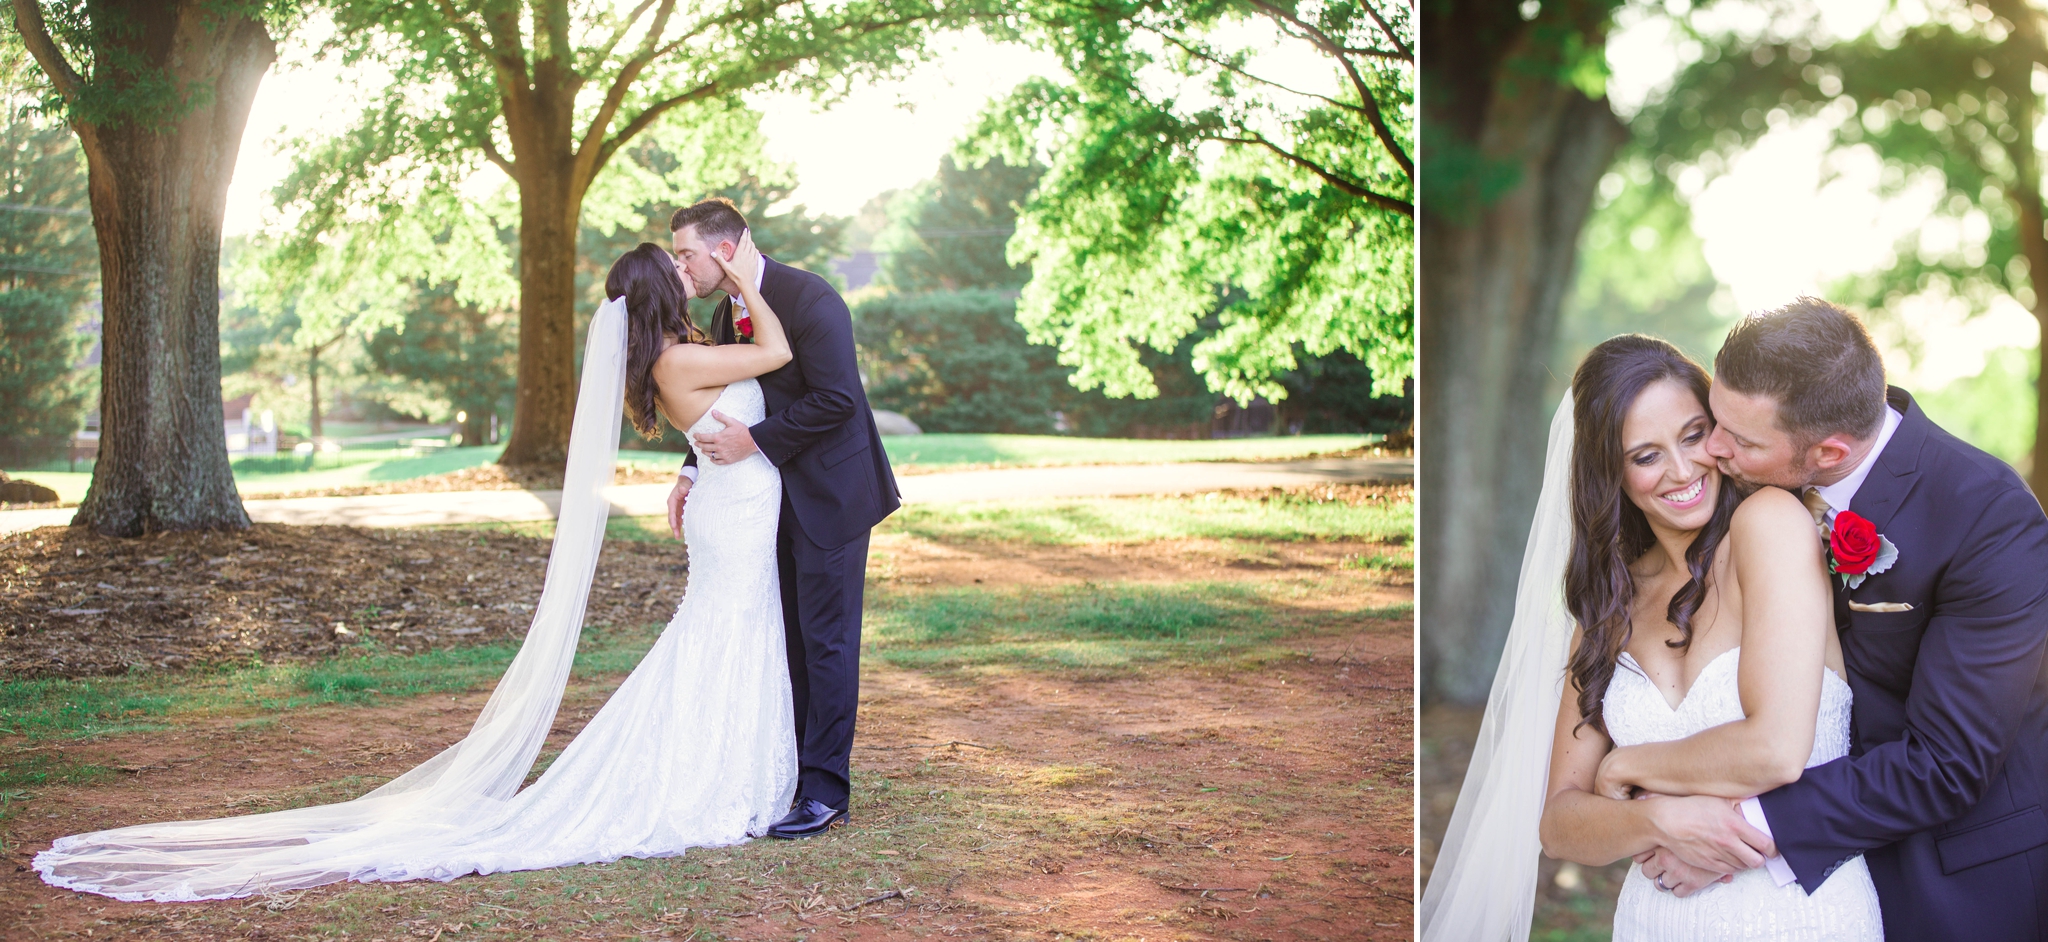 Wedding Photography at the Cabarrus Country Club in Concord NC - Charlotte North Carolina Photographer